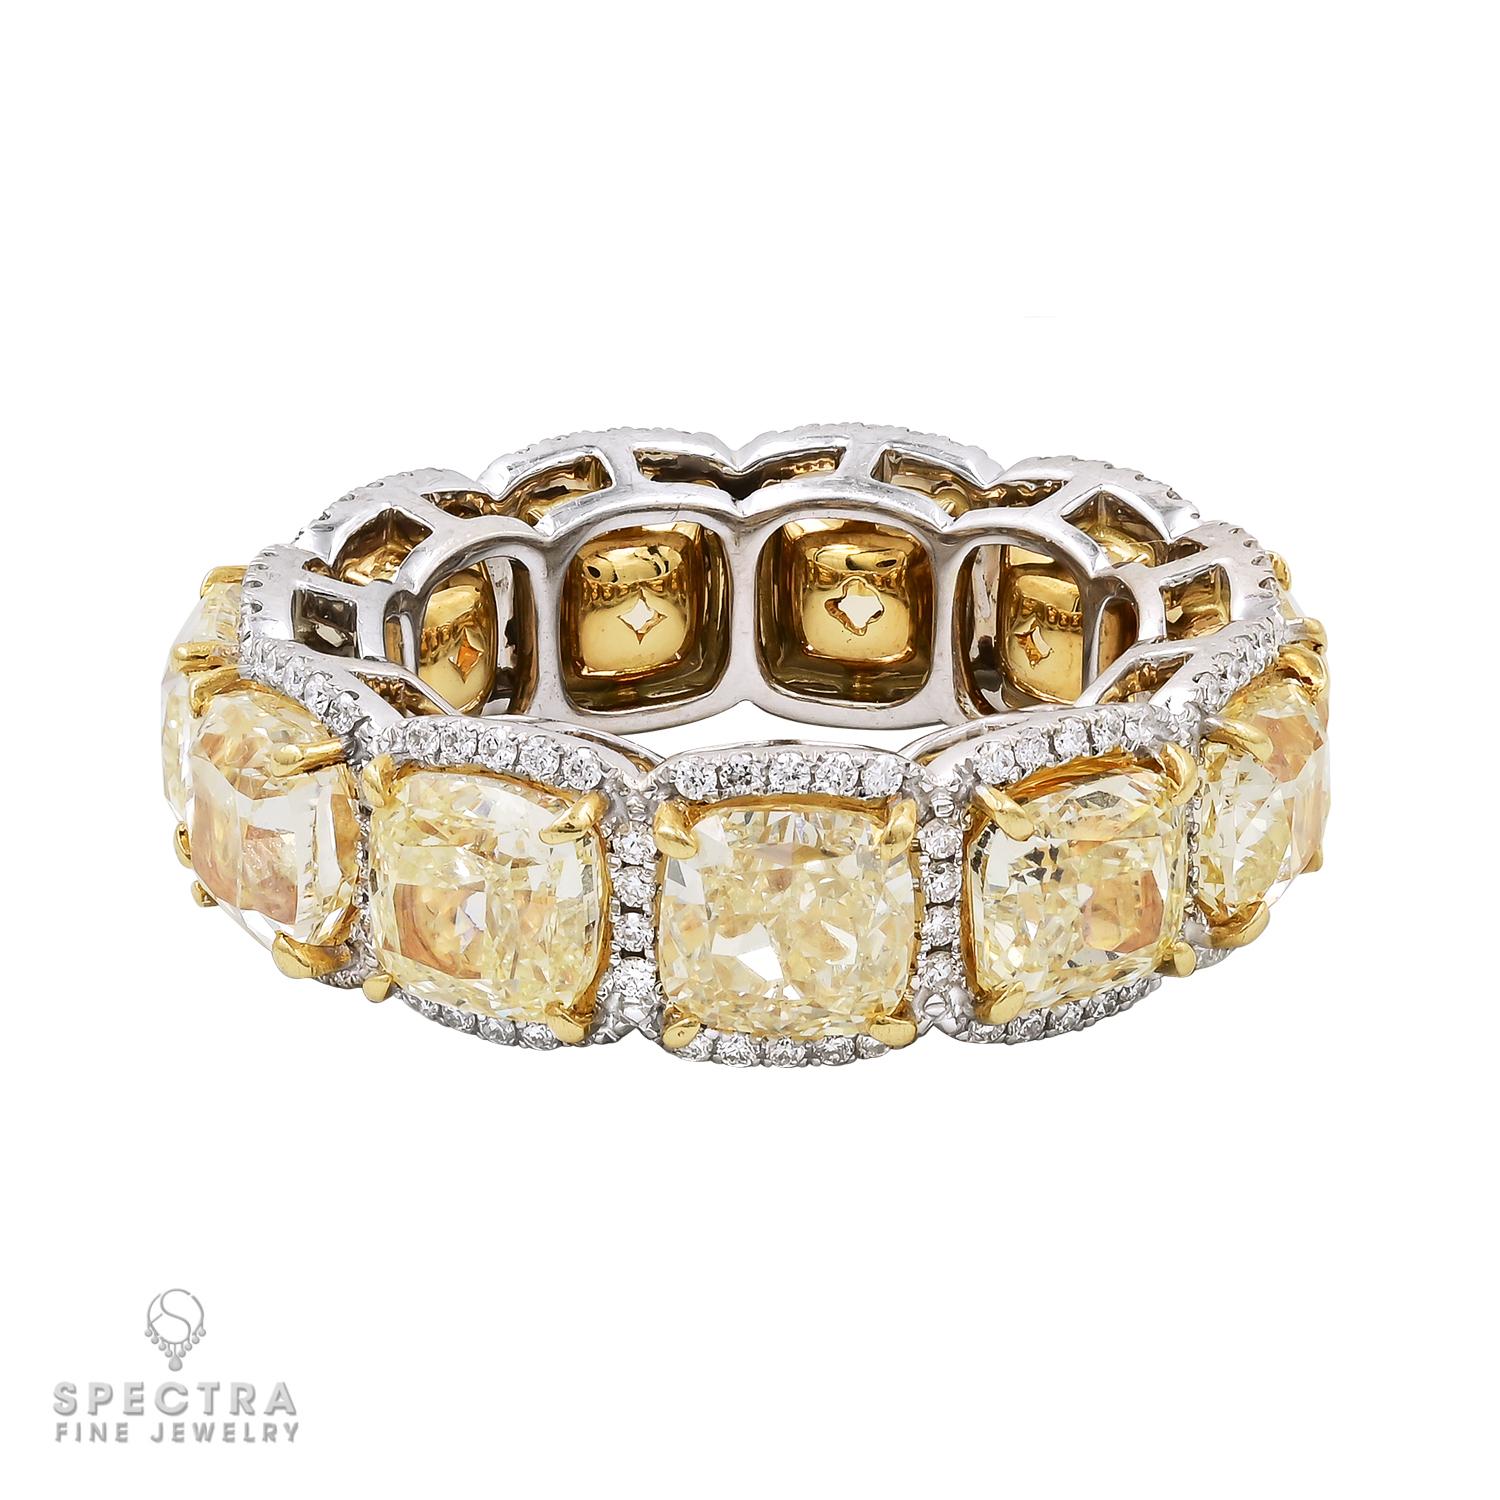 The 12.04cts Cushion Fancy Yellow Diamond Eternity Band ring by Spectra Fine Jewelry is an exquisite and captivating piece that exudes elegance and luxury. Crafted with meticulous attention to detail, this ring showcases 11 dazzling Fancy Yellow